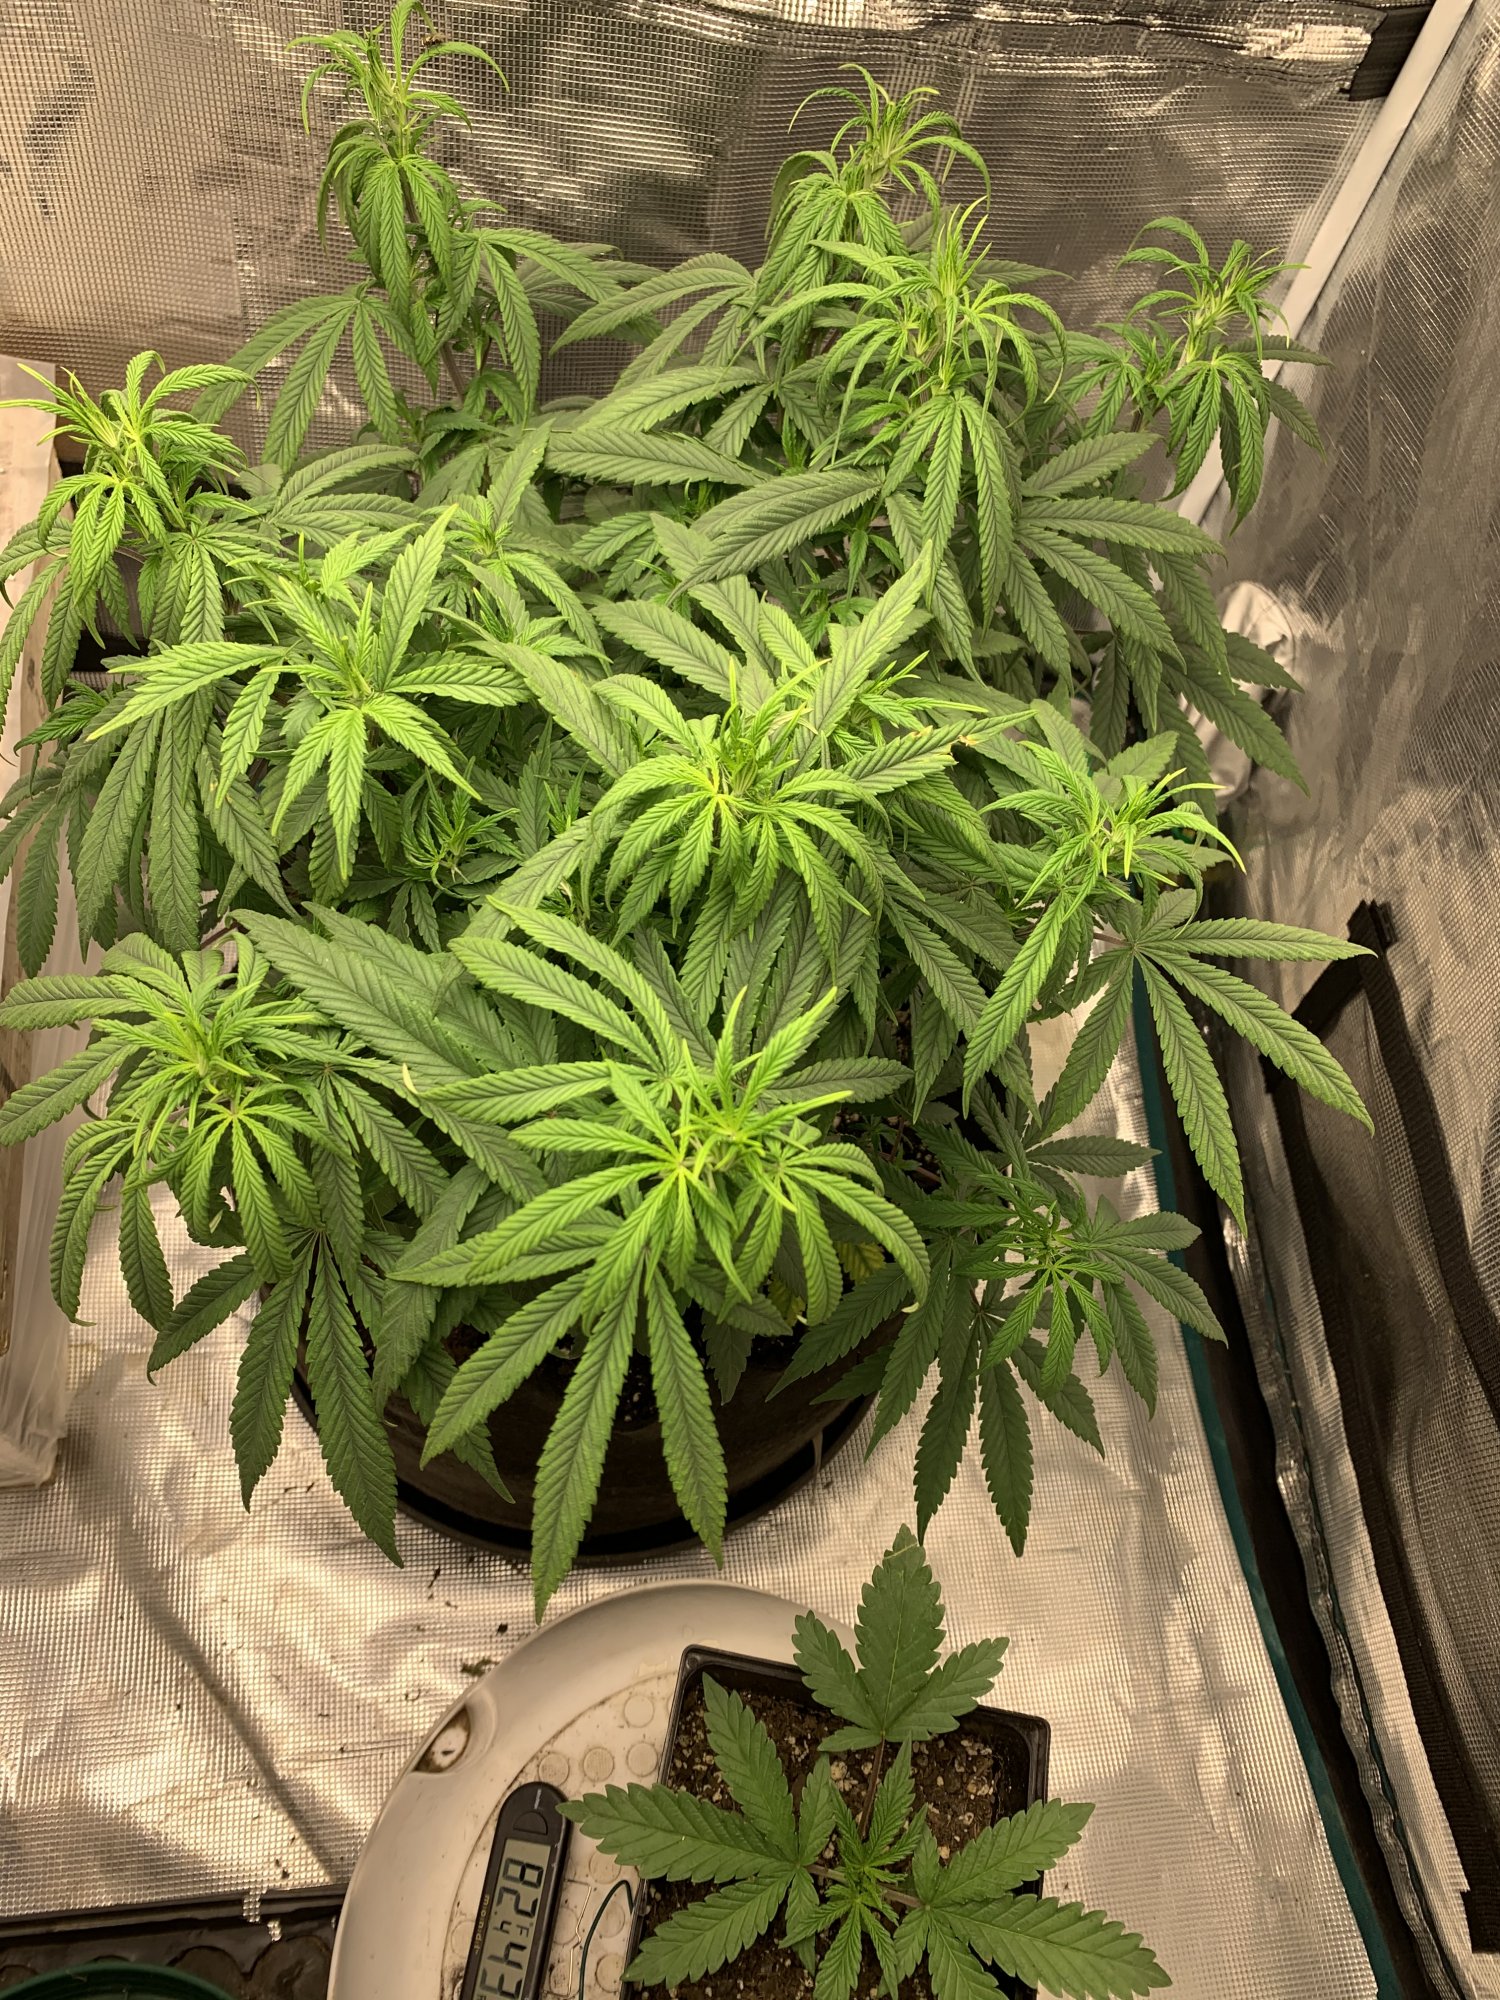 Star cookies continue to show deficiencies dont want to burn help 6